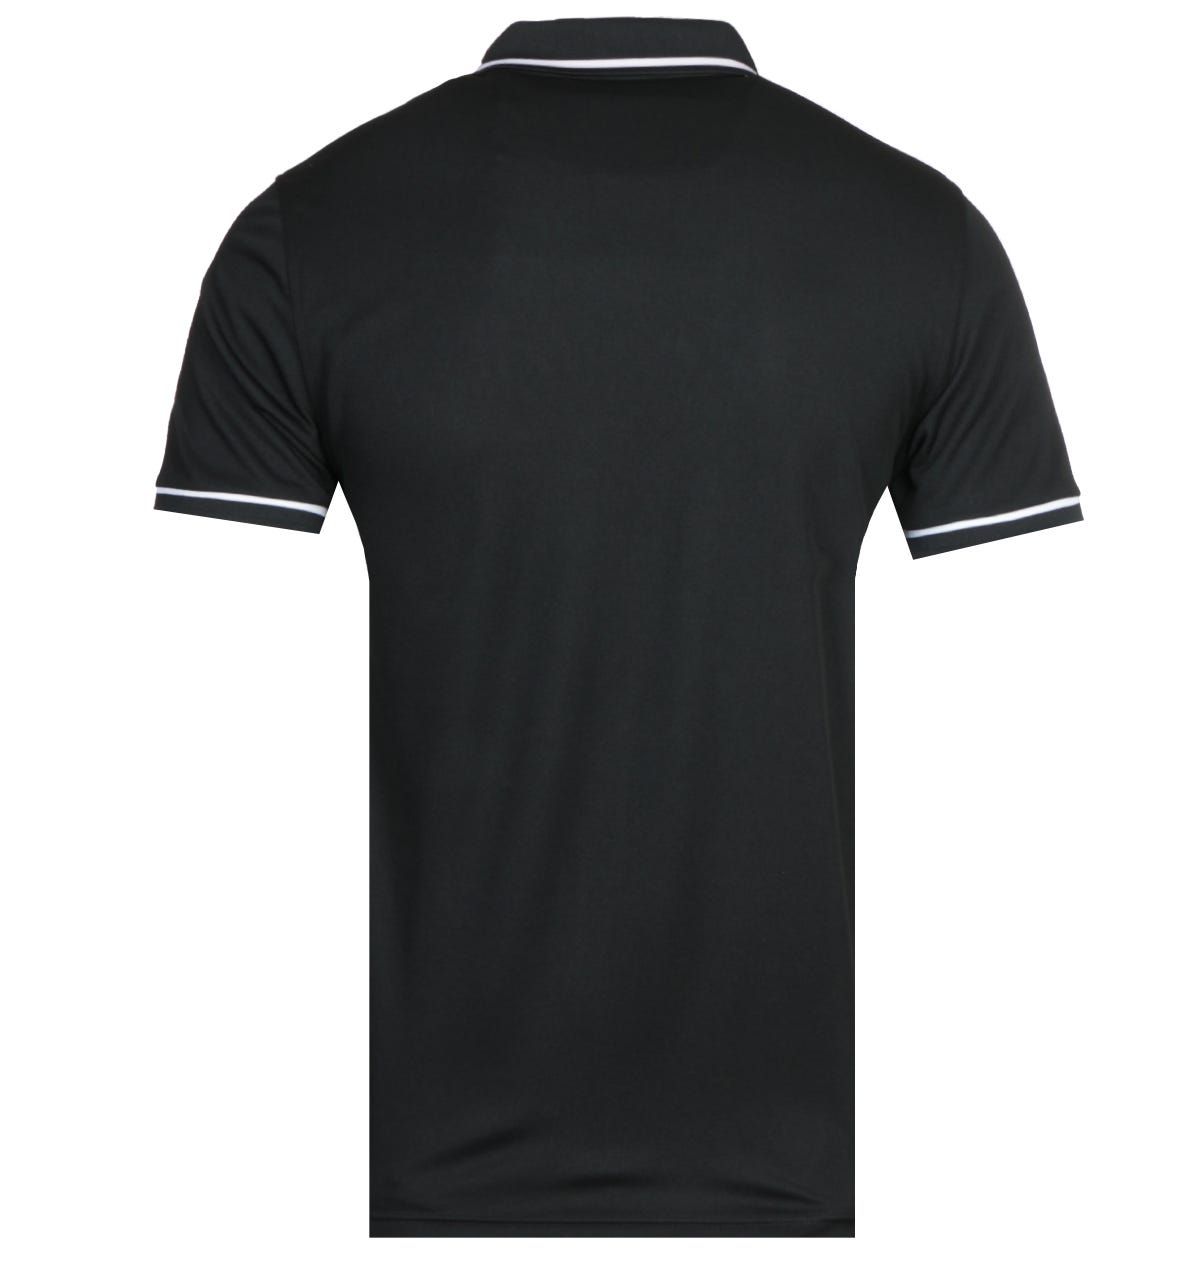 <p>A pure cotton composition crafted by Lacoste. The Lacoste Tipped Black MC Homme Polo Shirt is fitted with a three-button placket, spread collar and ribbed trims. The design is finished with the Lacoste logo embroidered on the chest.</p><ul><li>Cotton composition</li><li>Crew neck</li><li>Stripe design</li><li>Tonal stitching</li><li>Ribbed trims</li><li>Lacoste logo embroidered on chest</li></ul><p>Style & Fit:</p><ul><li>Regular fit</li><li>Fits true to size</li></ul><p>Fabric Composition & Care:</p><ul><li>100% Cotton</li><li>Machine washable</li></ul>